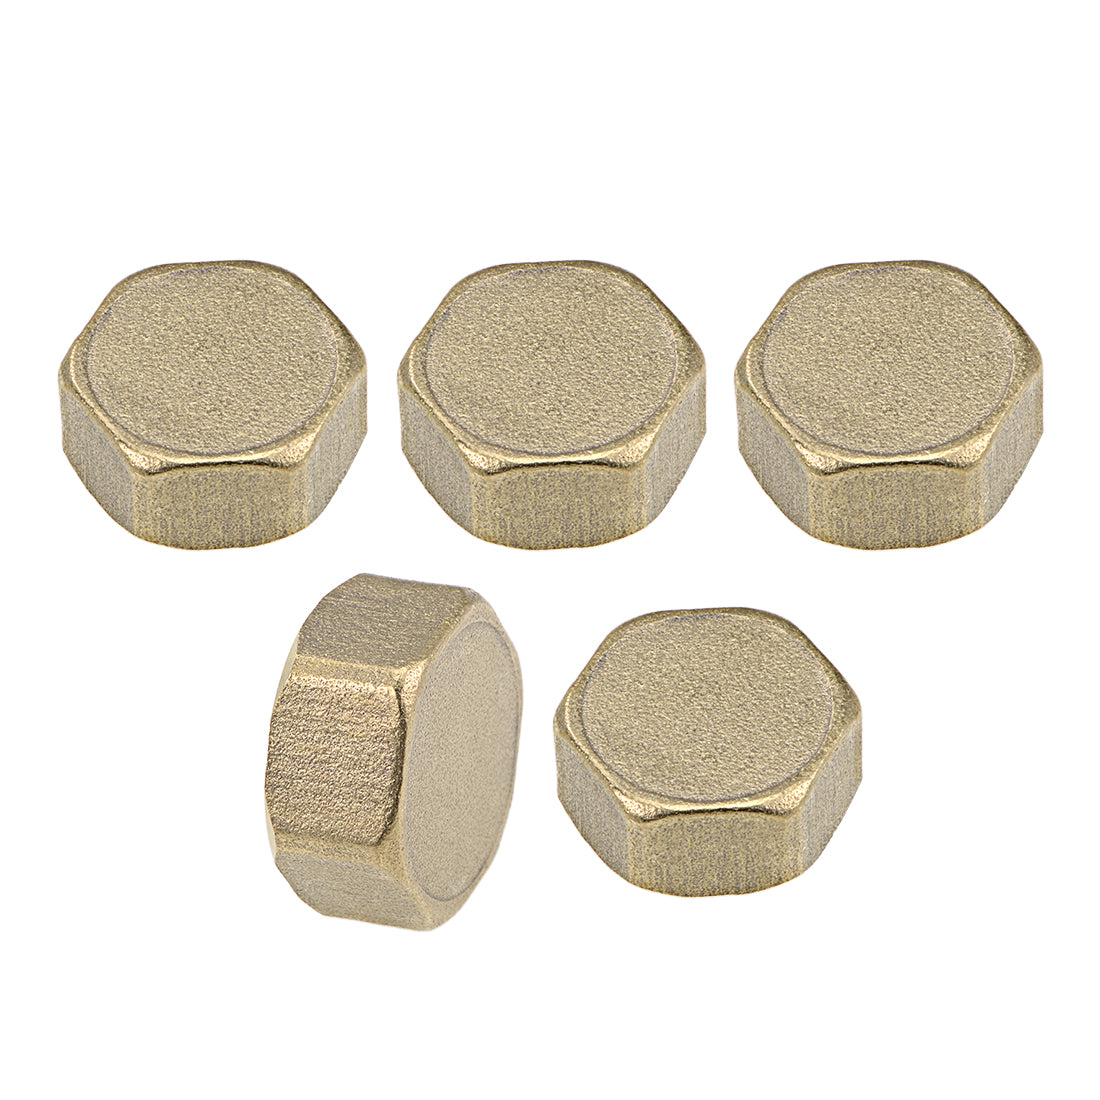 uxcell Uxcell Brass Cap 5pcs G1/2 Female Pipe Fitting Hex Compression Stop Valve Connector 11x23mm